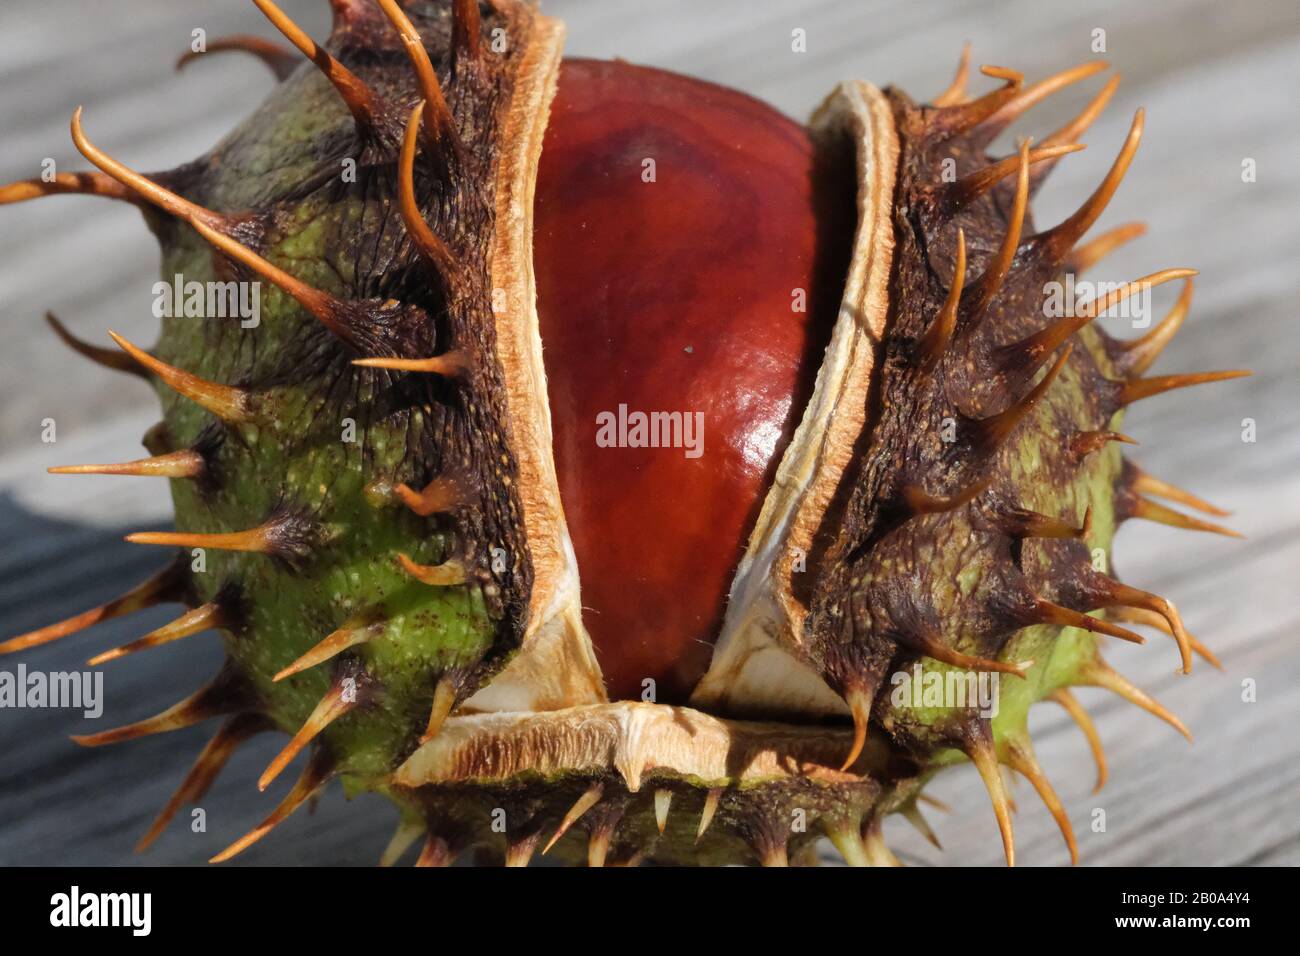 Spiky Case High Resolution Stock Photography and Images - Alamy